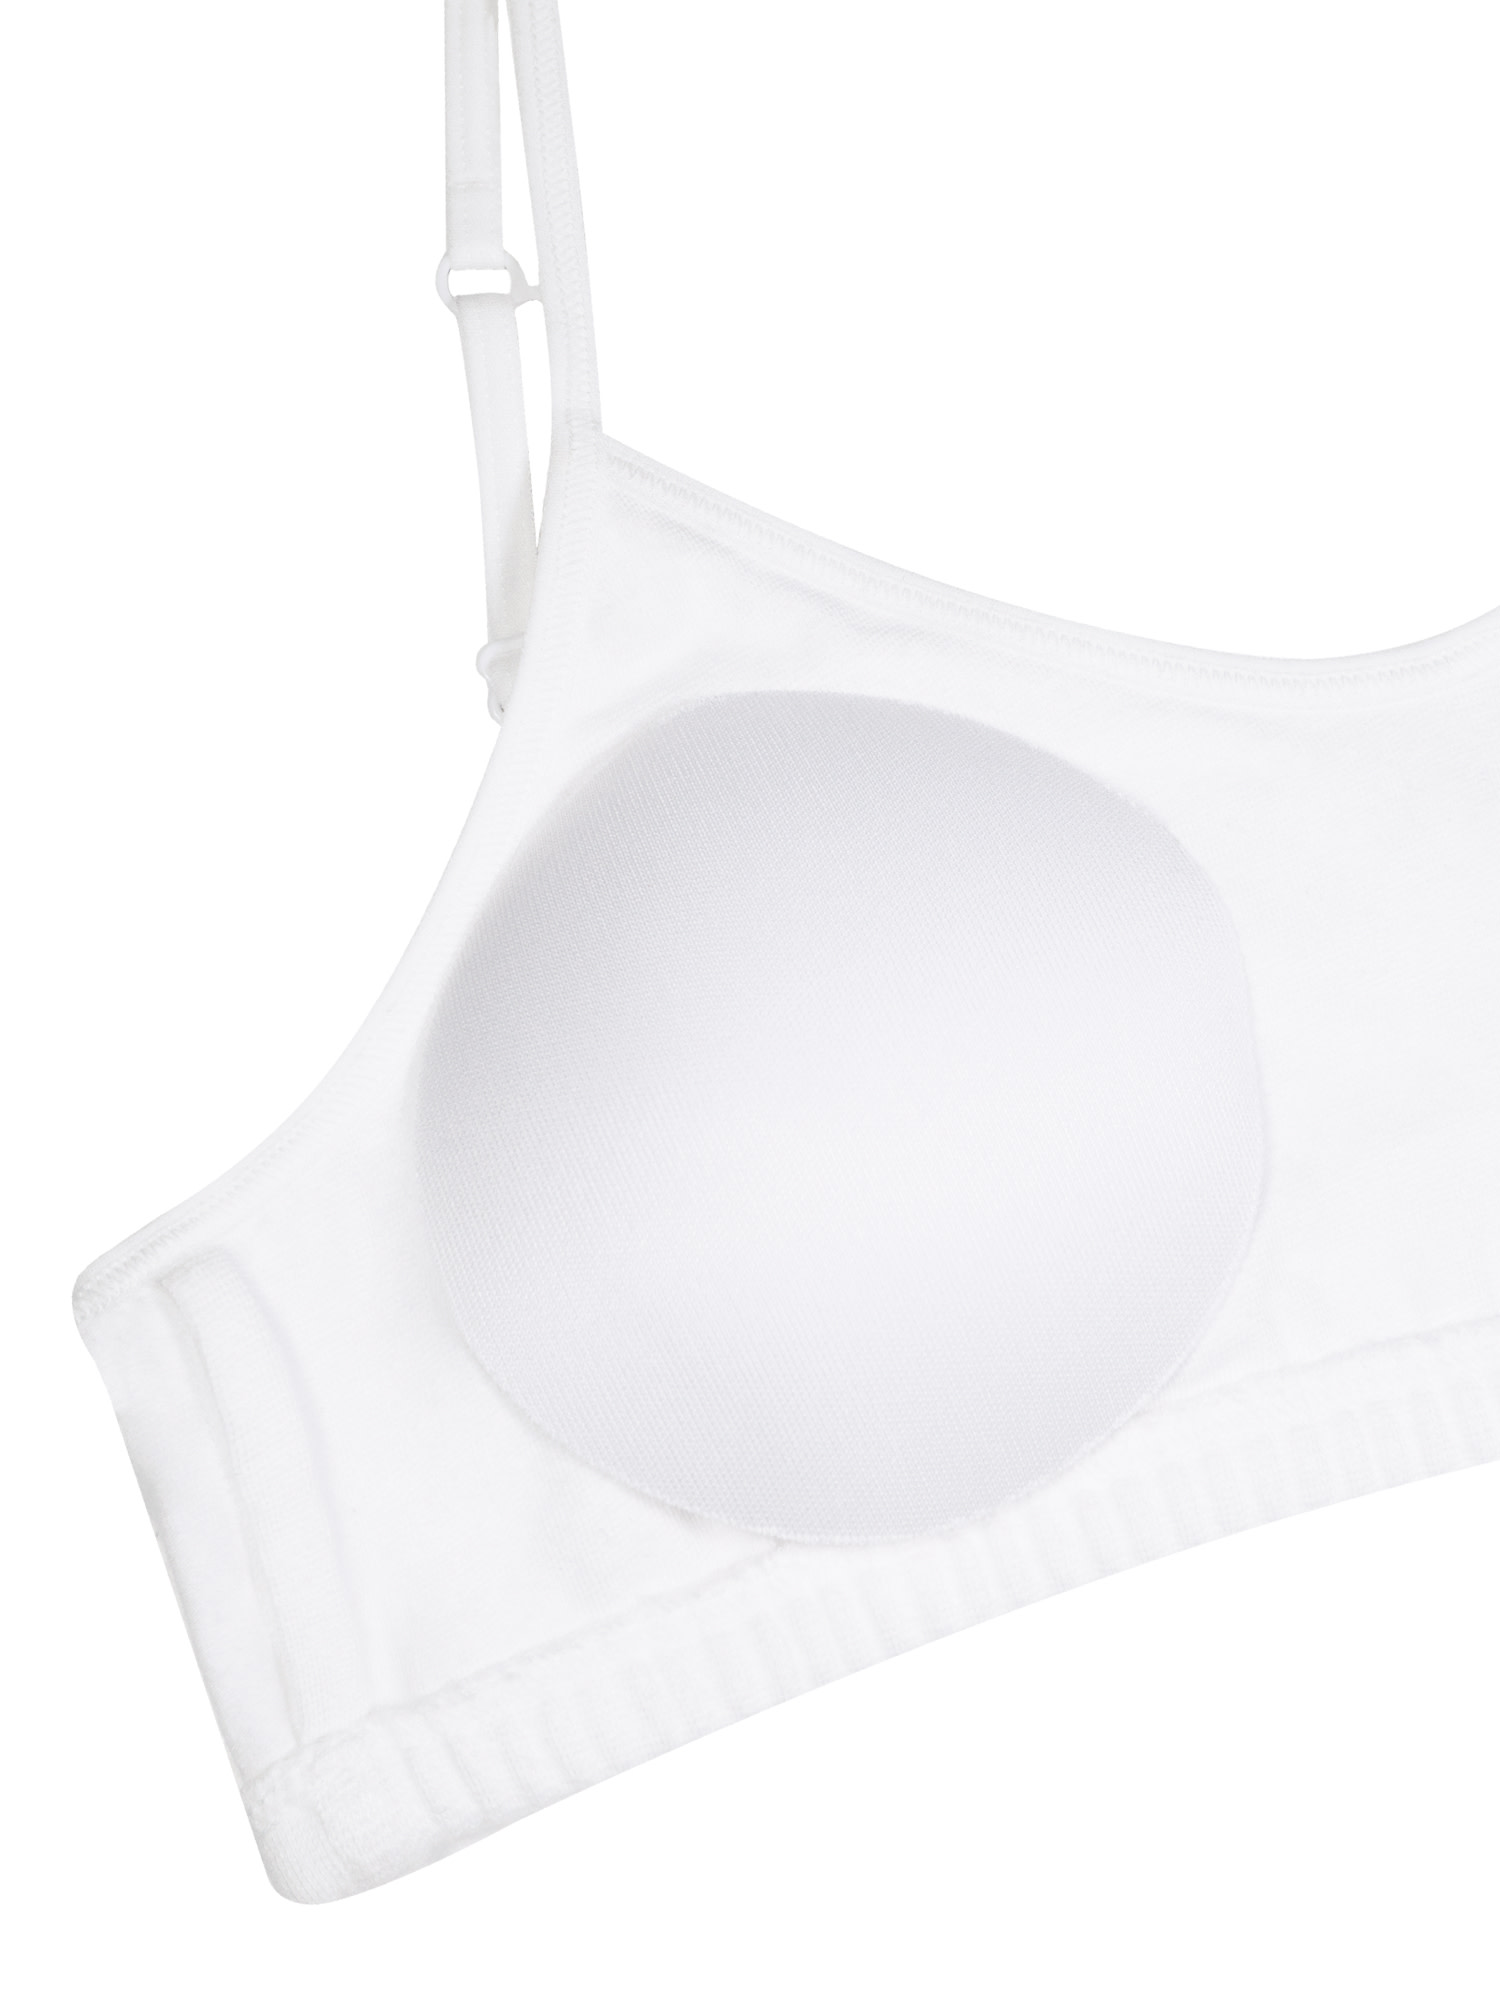 Fruit of the Loom Girls Sports Bra with Removable Pads, 2-Pack, Sizes (28-38) - image 2 of 6